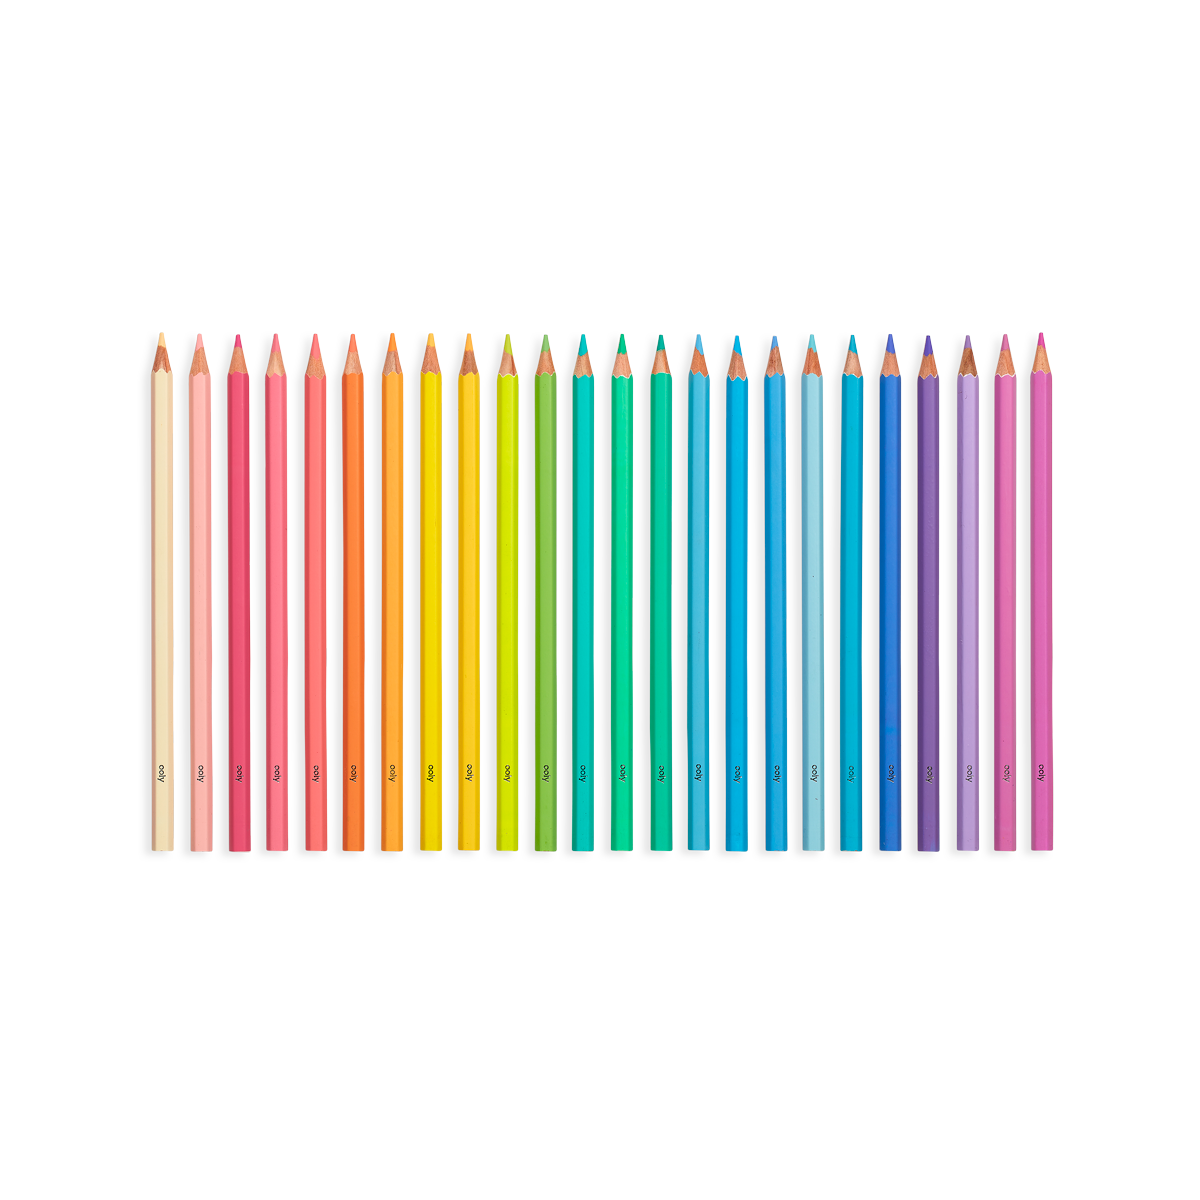 Ooly - Pastel Hues Colored Pencils - Set of 24